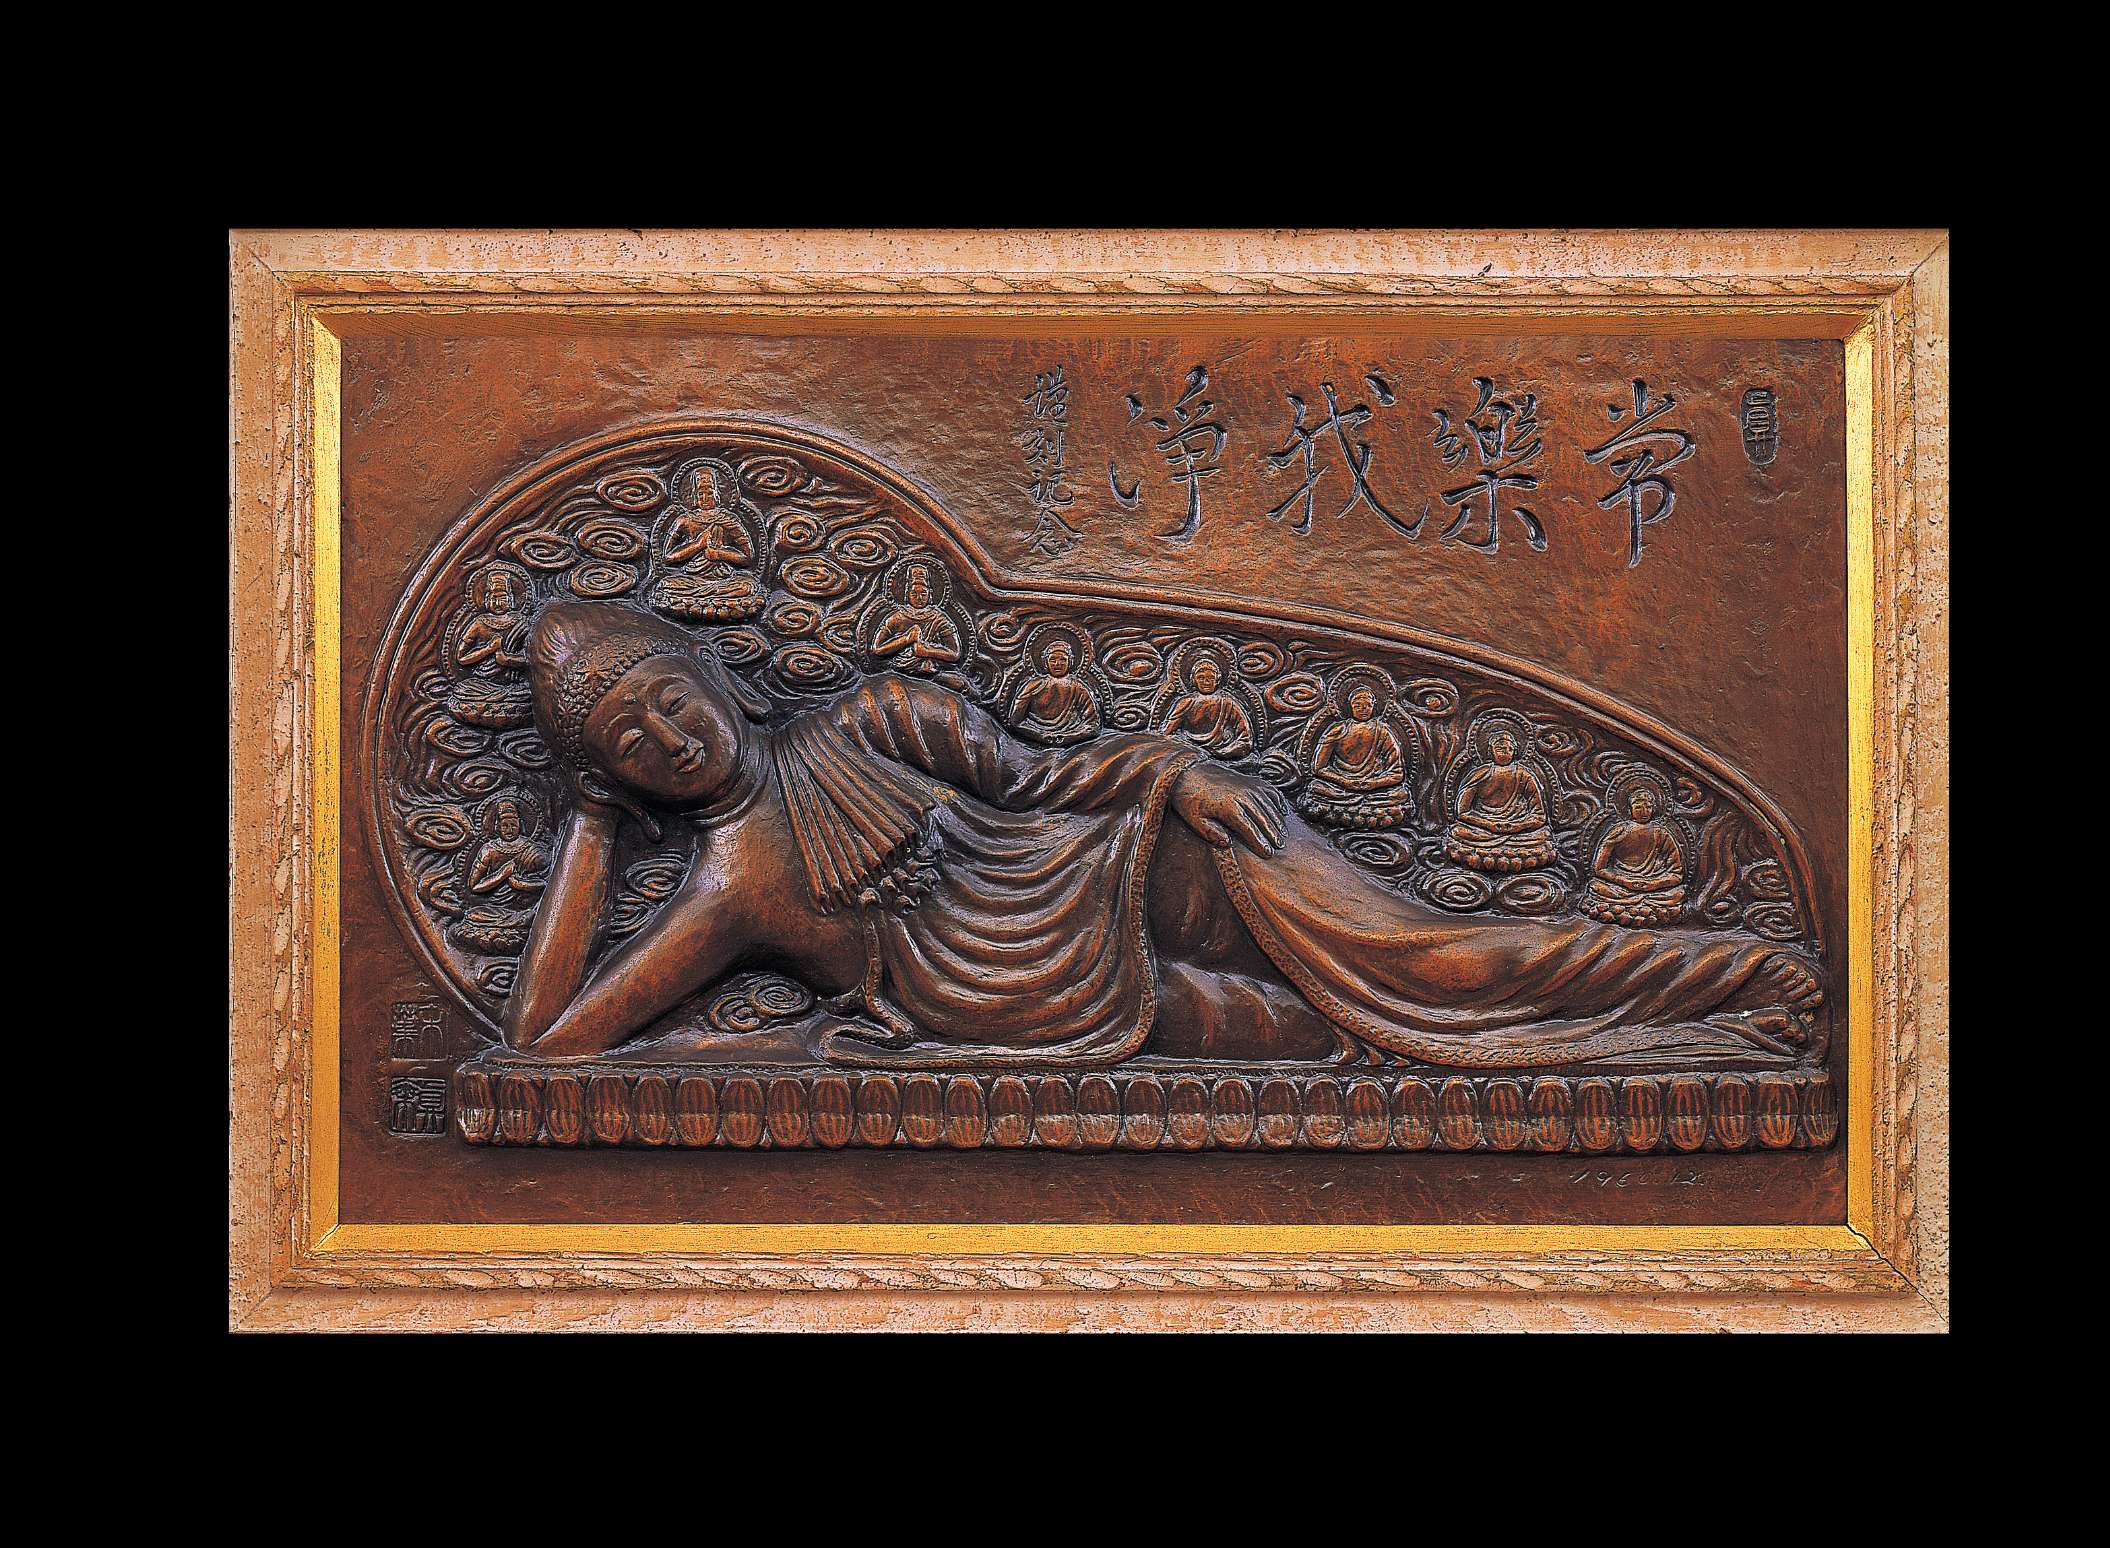 A relief of Buddha laying on his right side atop a bed of stylized lotuses, backed by a nimbus bearing 9 small buddhas is carved into a reddish brown slab near an etching of Japanese calligraphy.